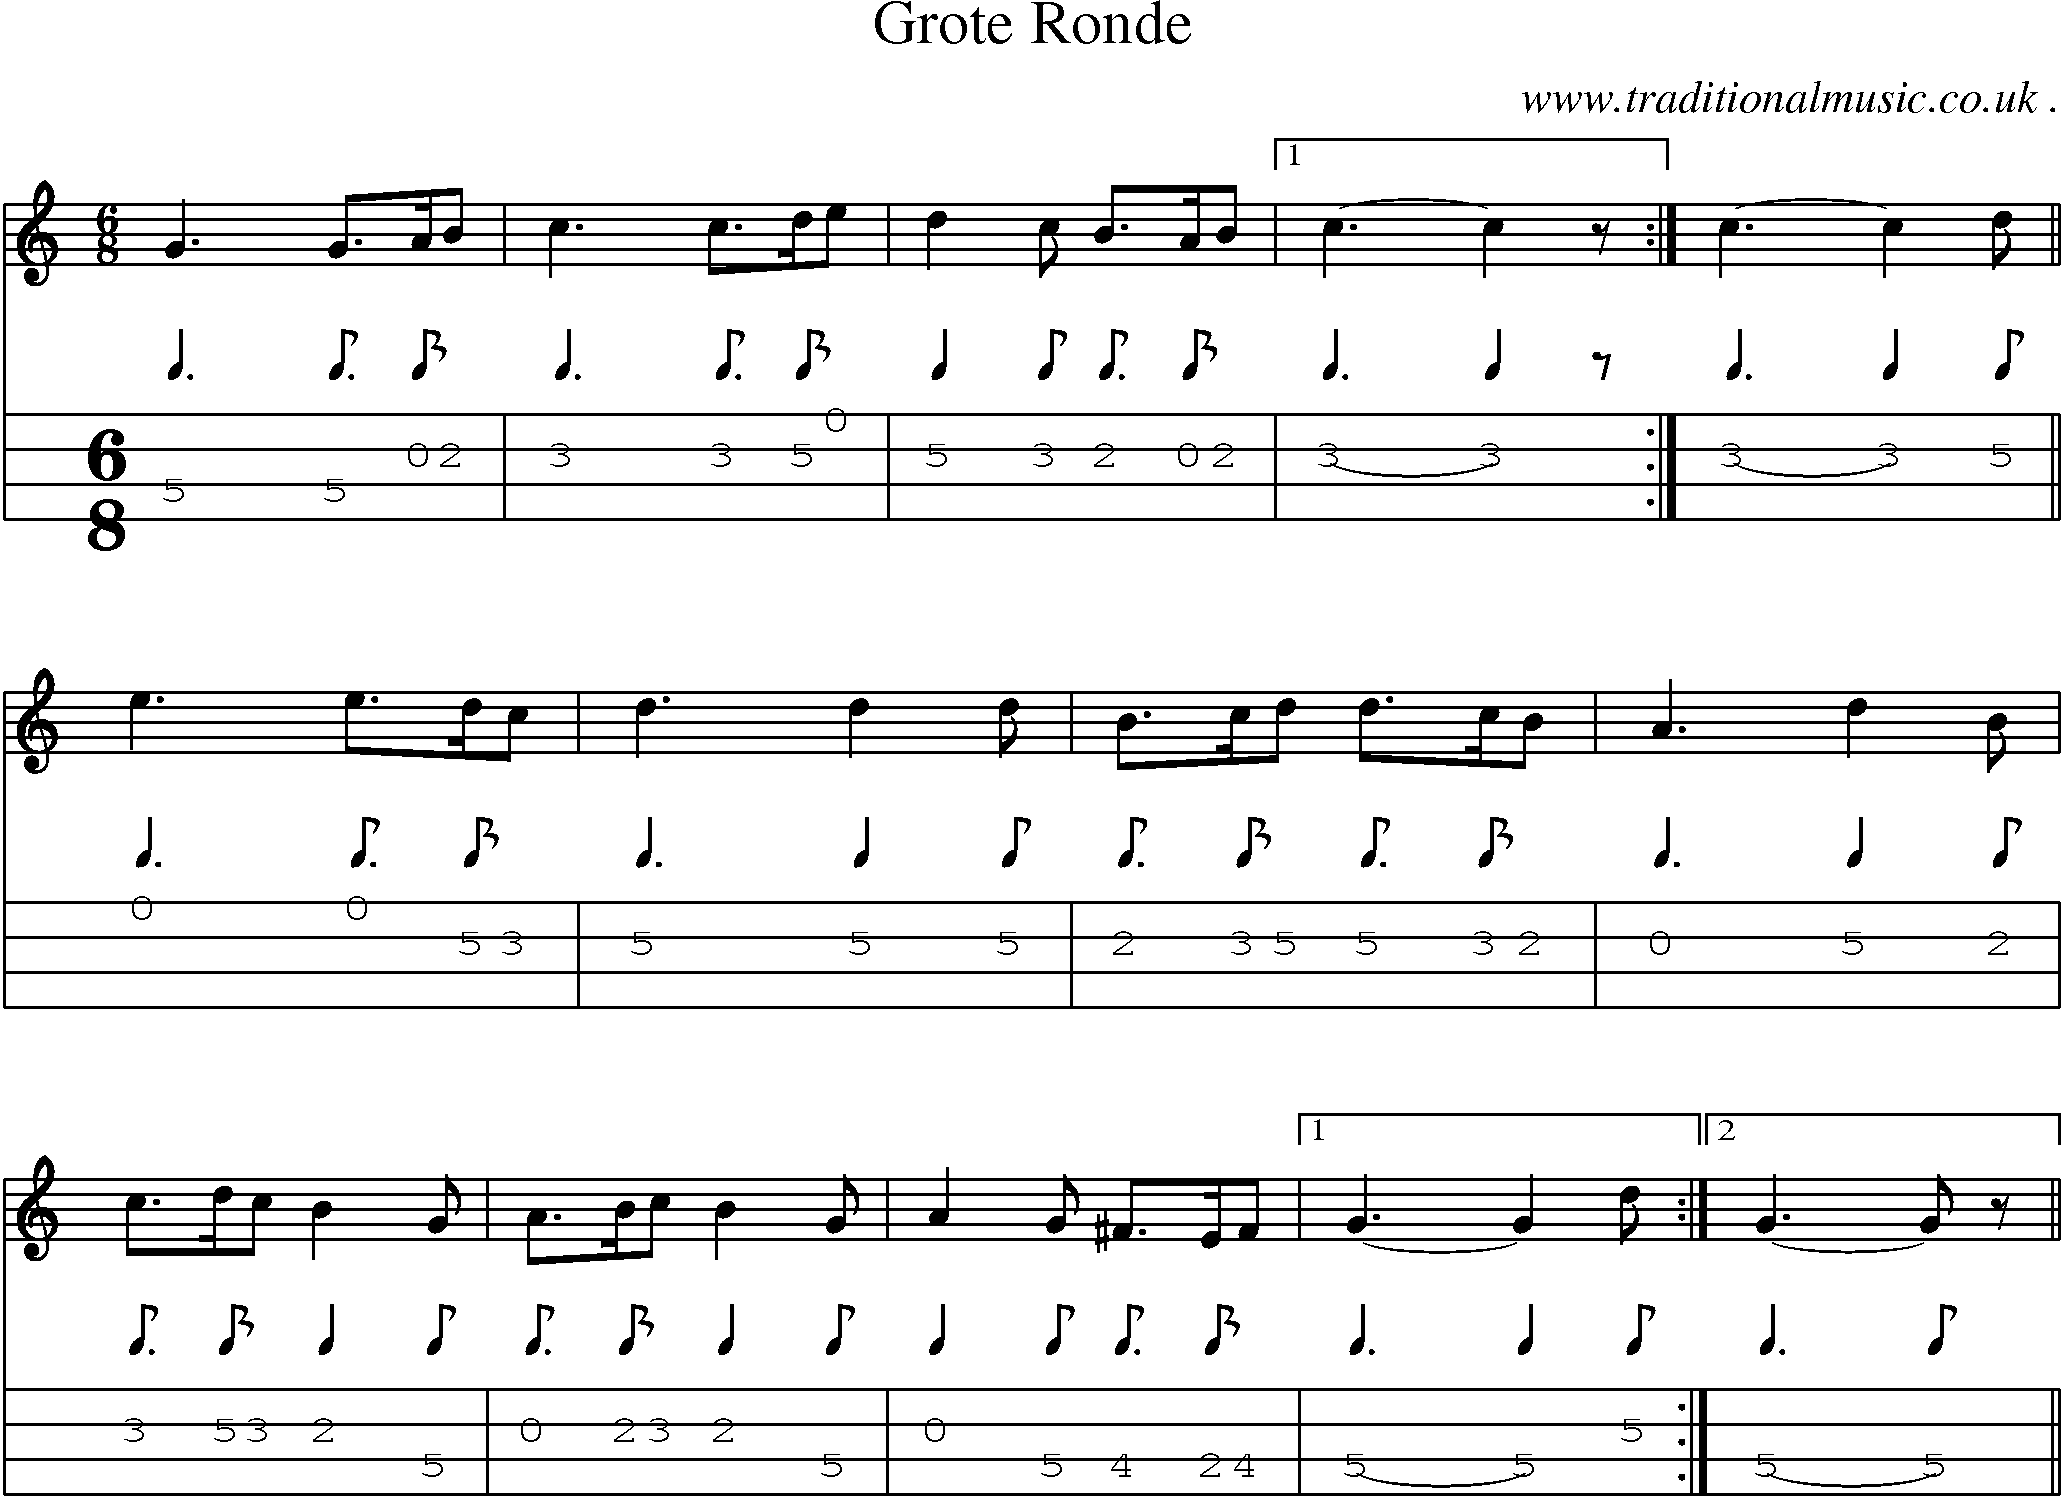 Sheet-Music and Mandolin Tabs for Grote Ronde